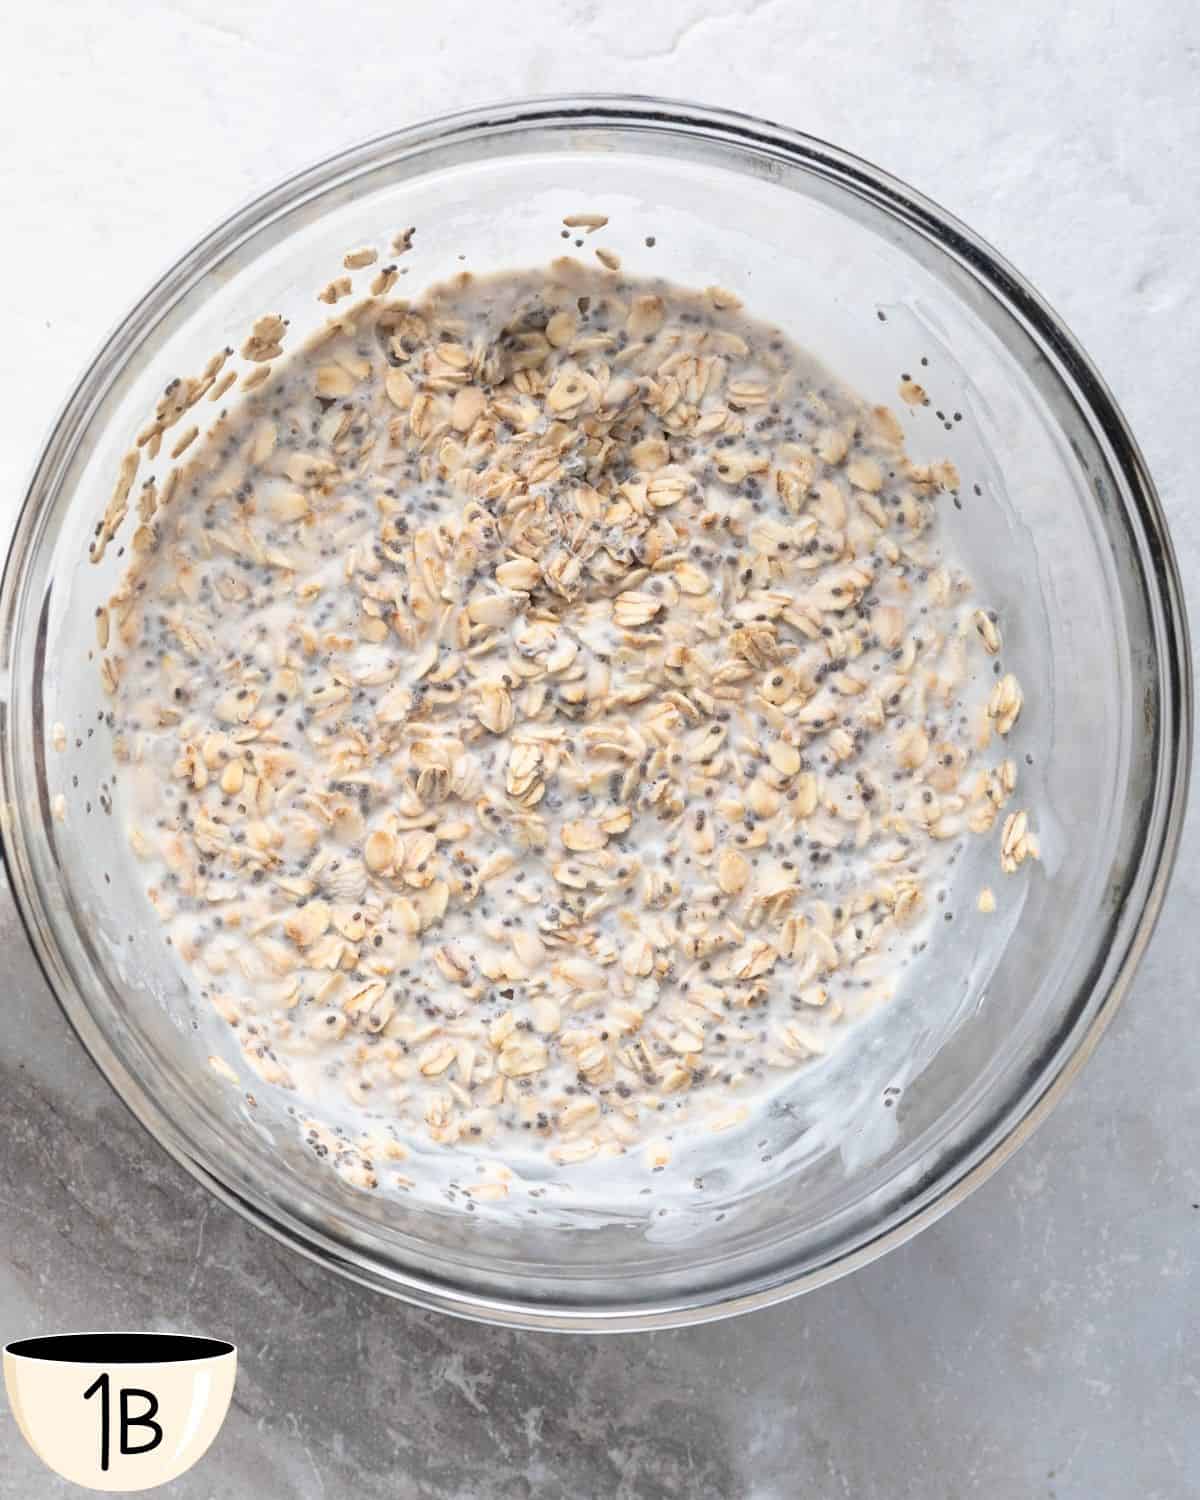 A glass bowl full of overnight oats that have set overnight in the fridge.